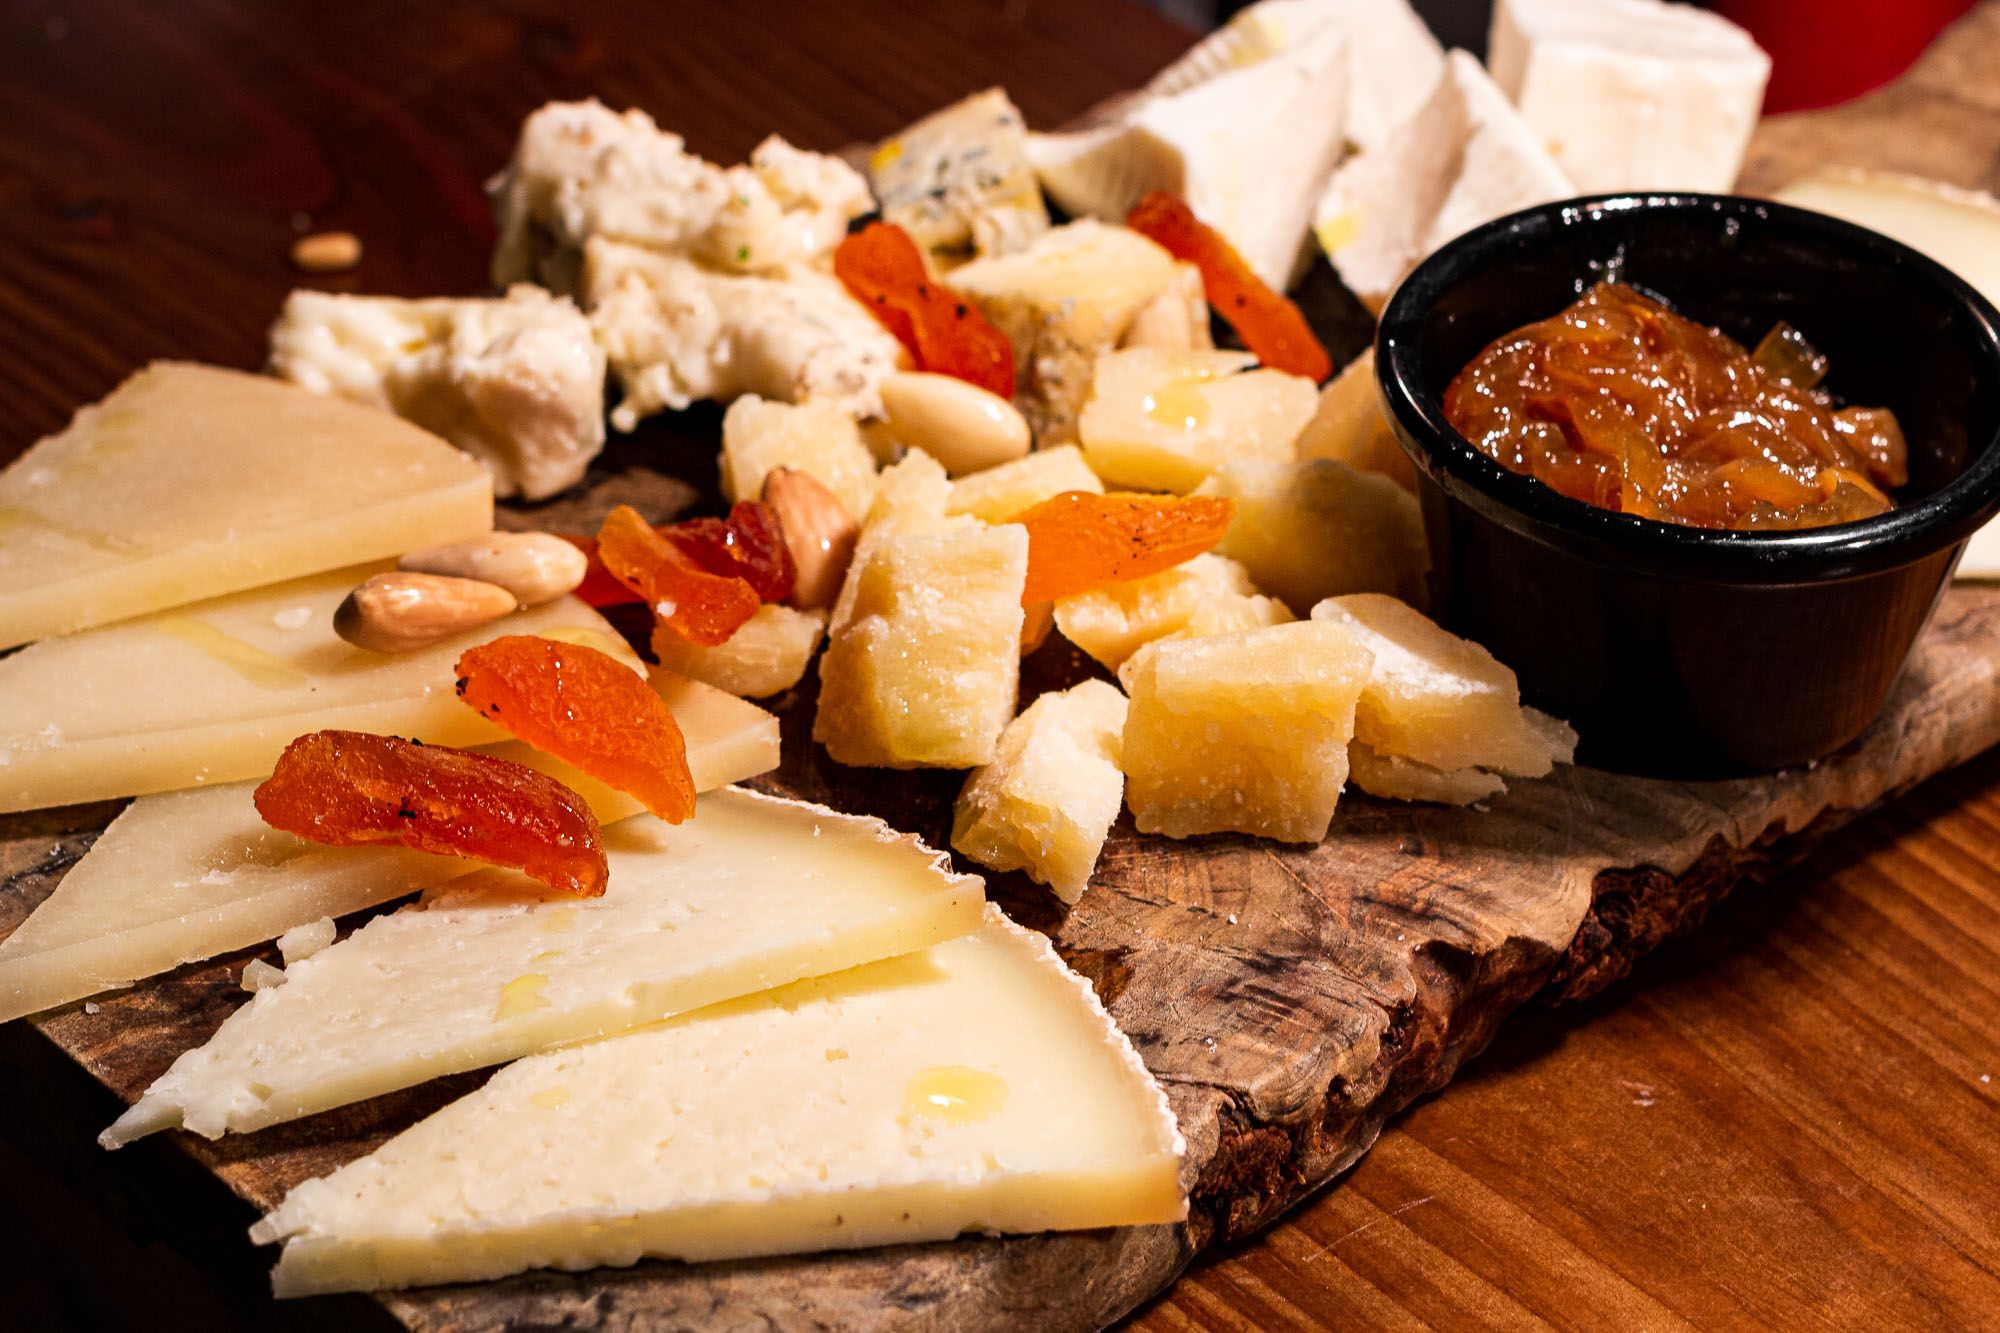 Selection of cheeses from Extremadura with quince, nuts and special breads: